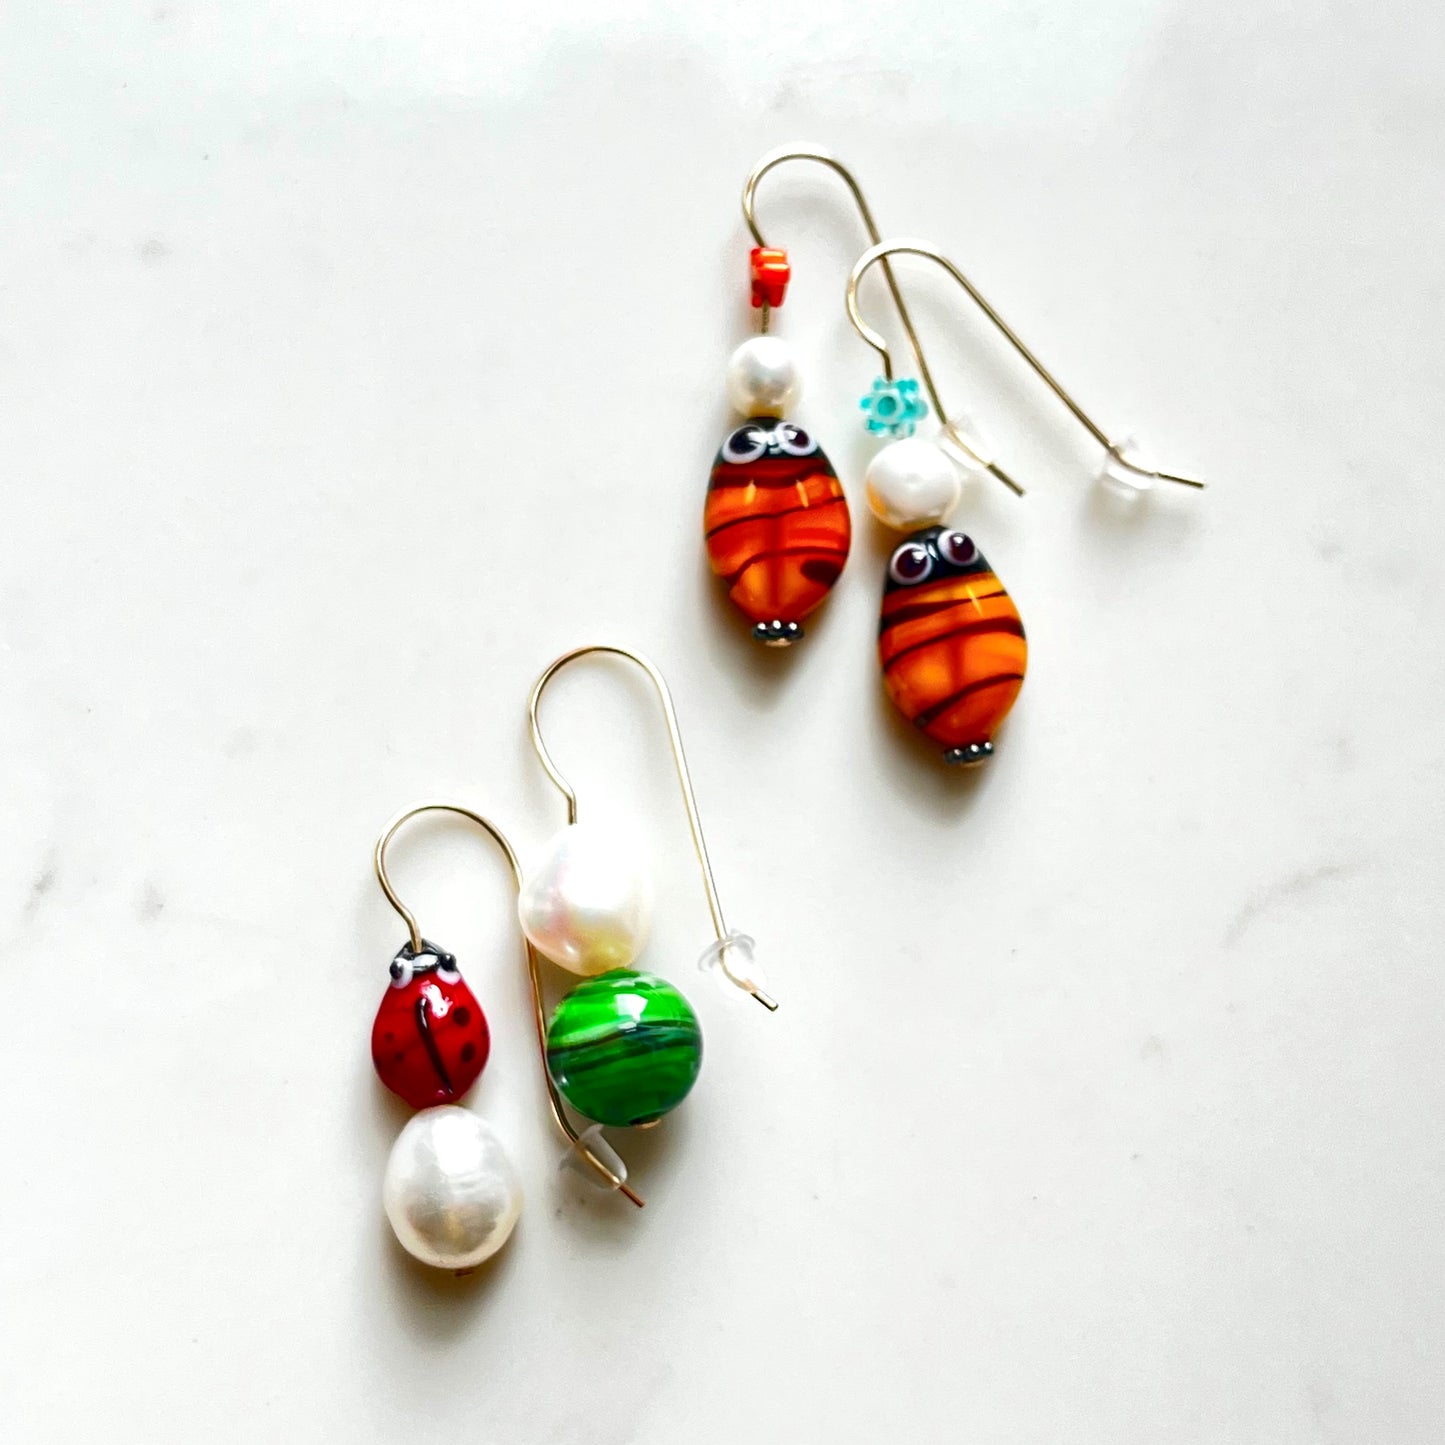 Bee and ladybug earrings, murano glass beads with baroque white pearls and millefiori beads